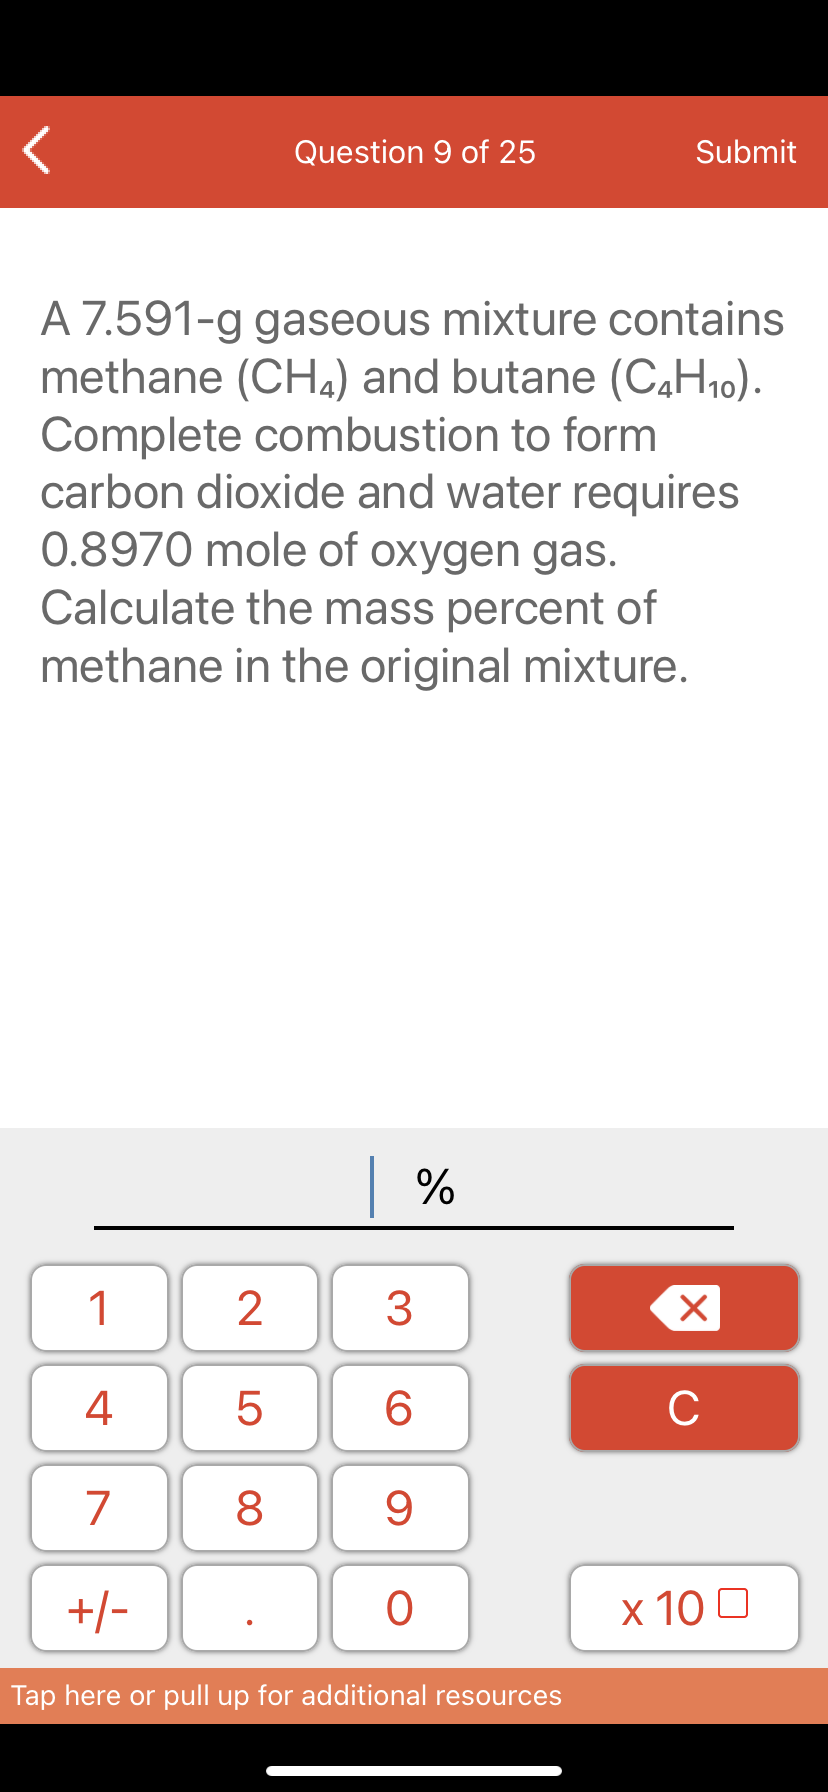 A 7.591-g gaseous mixture contains
methane (CHa) and butane (C4H10).
Complete combustion to form
carbon dioxide and water requires
0.8970 mole of oxygen gas.
Calculate the mass percent of
methane in the original mixture.
